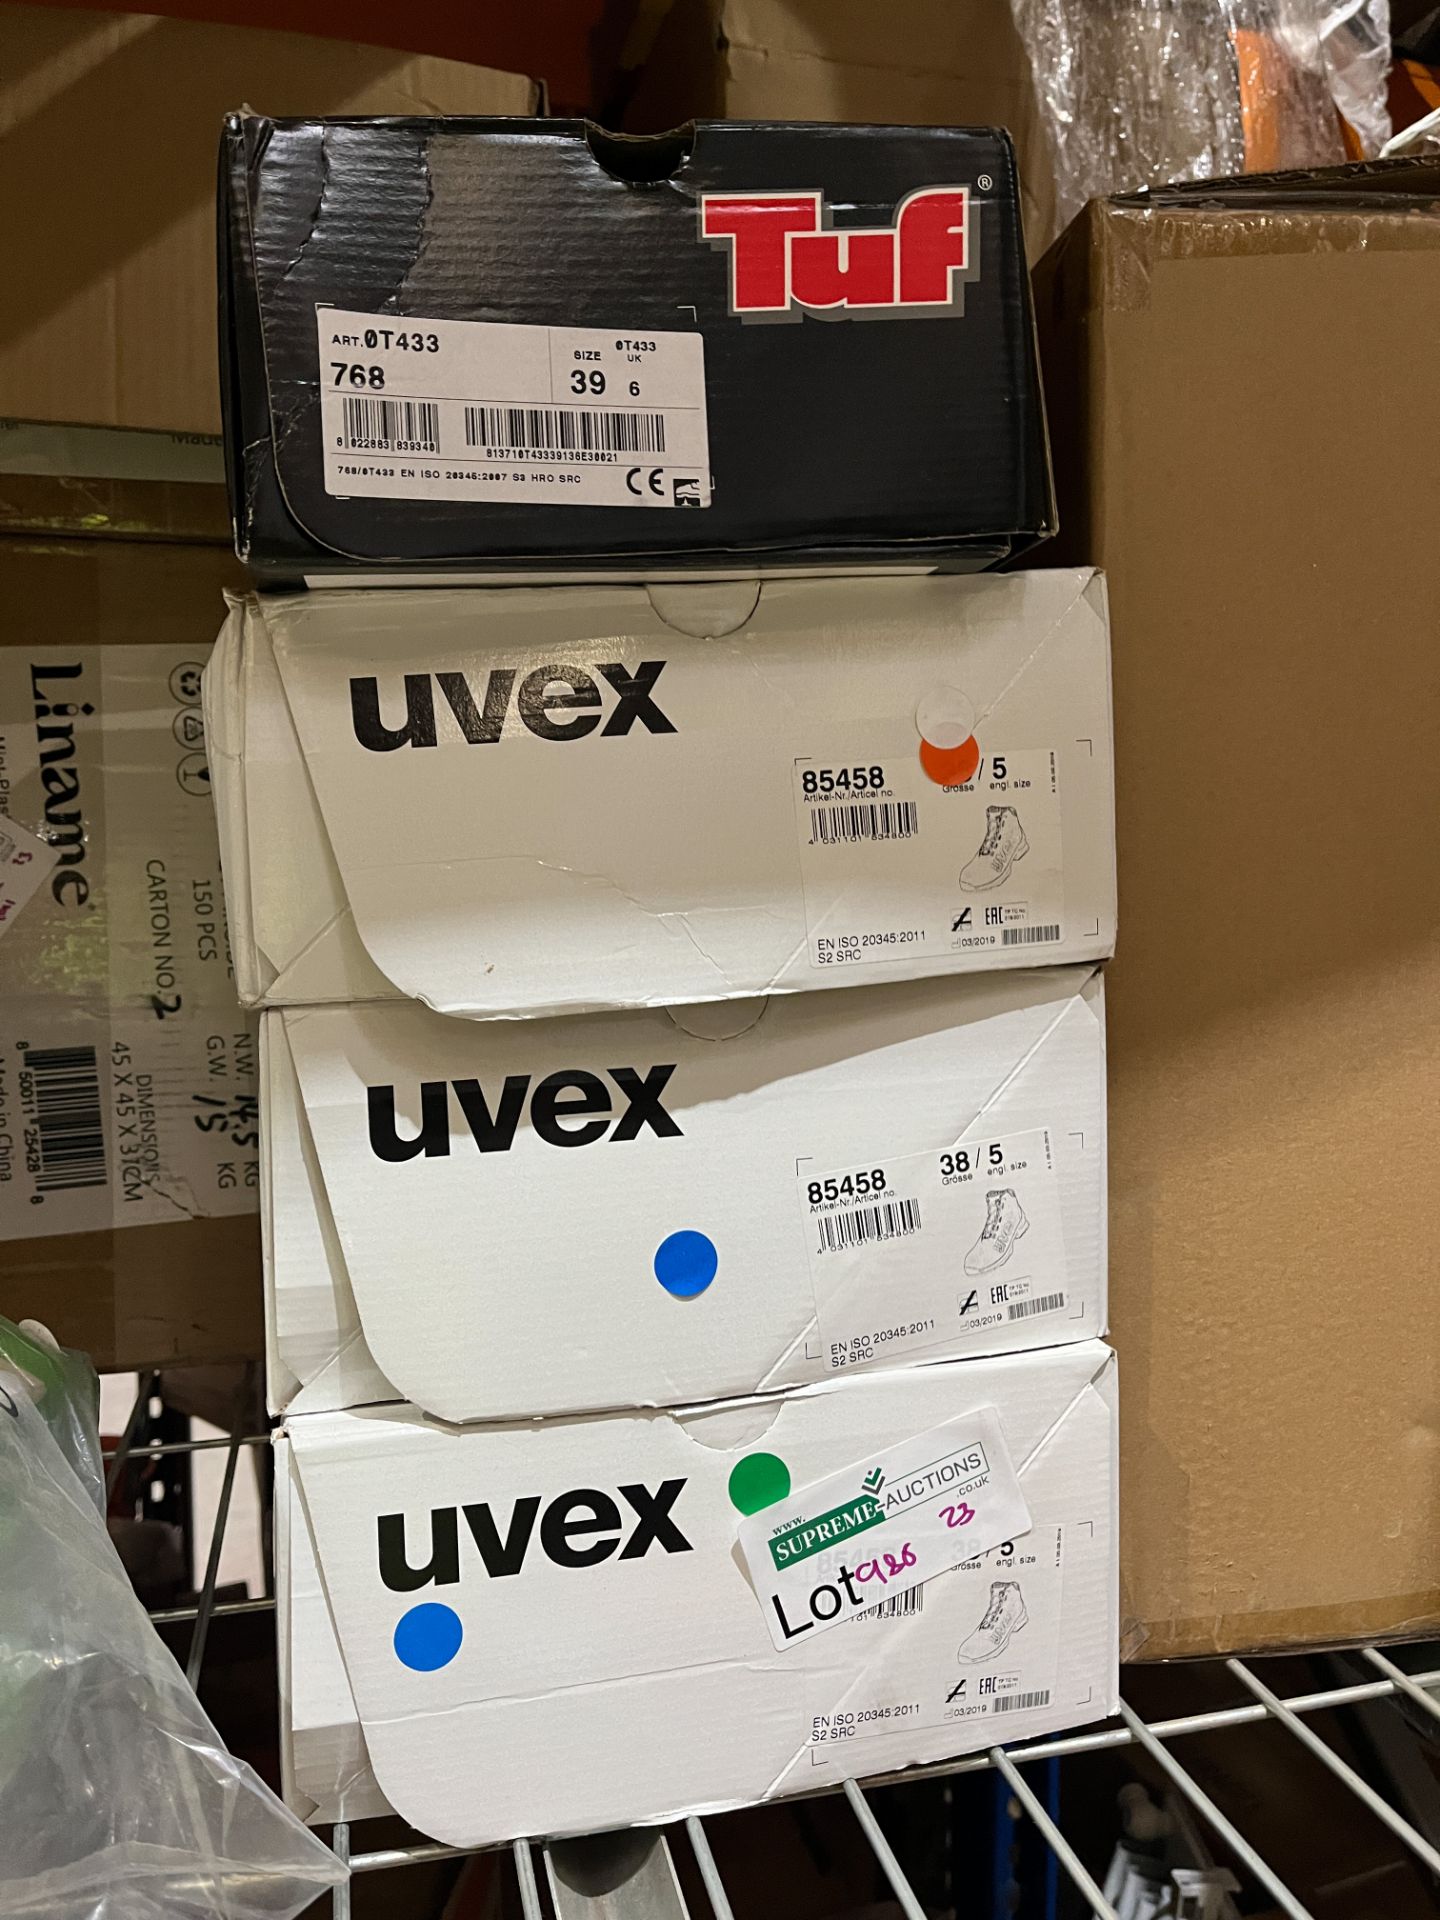 4 X BRAND NEW PAIRS OF PROFESSIONAL WORK BOOTS INCLUDING UVEX AND TUF IN VARIOUS SIZES R10-4